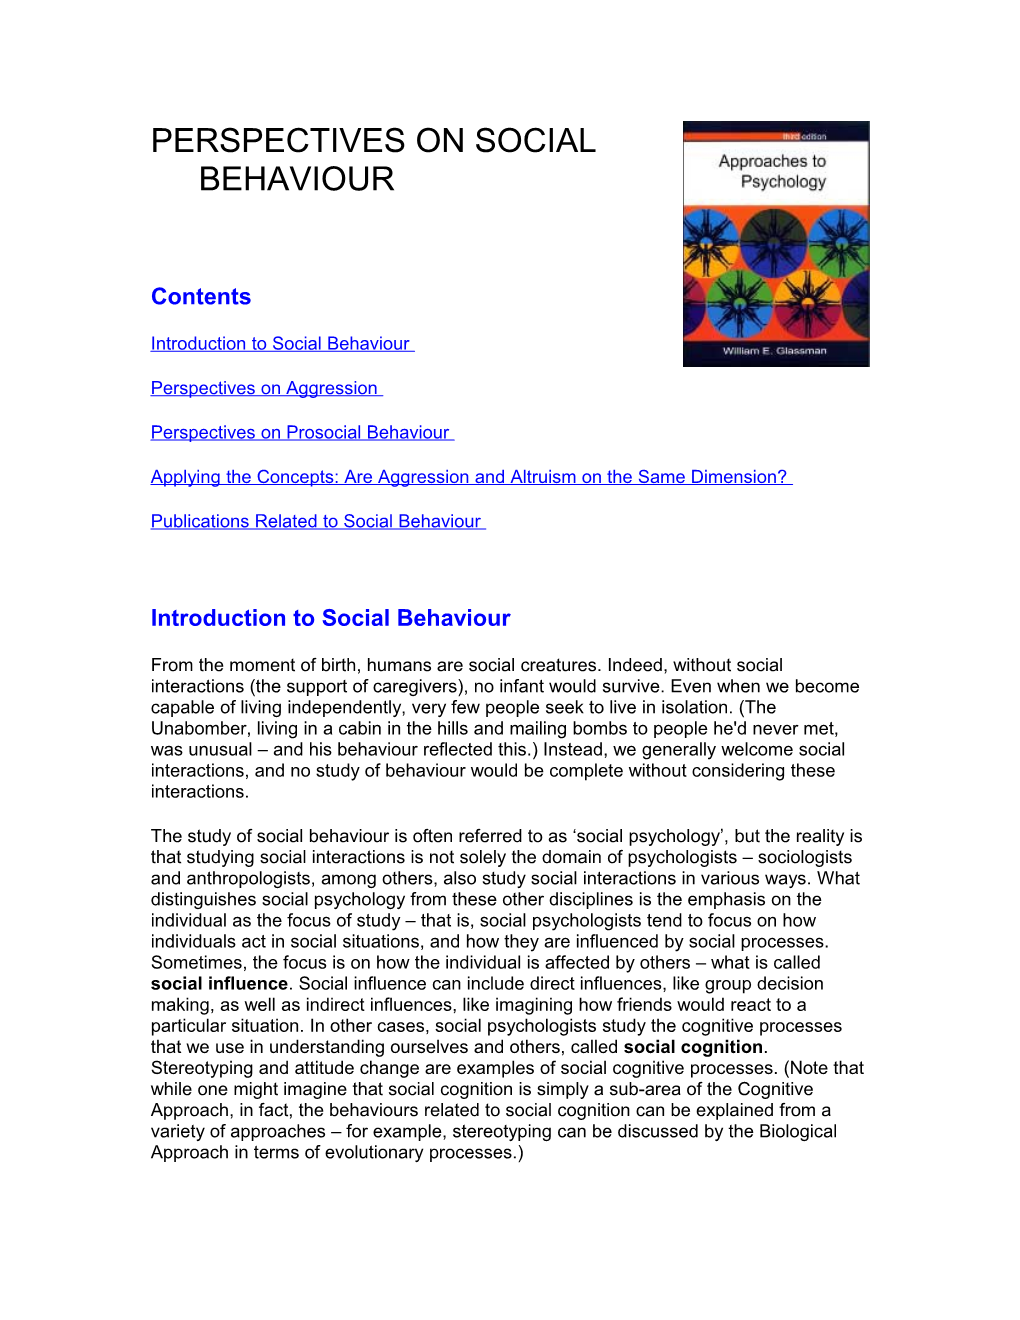 Perspectives on Social Behaviour